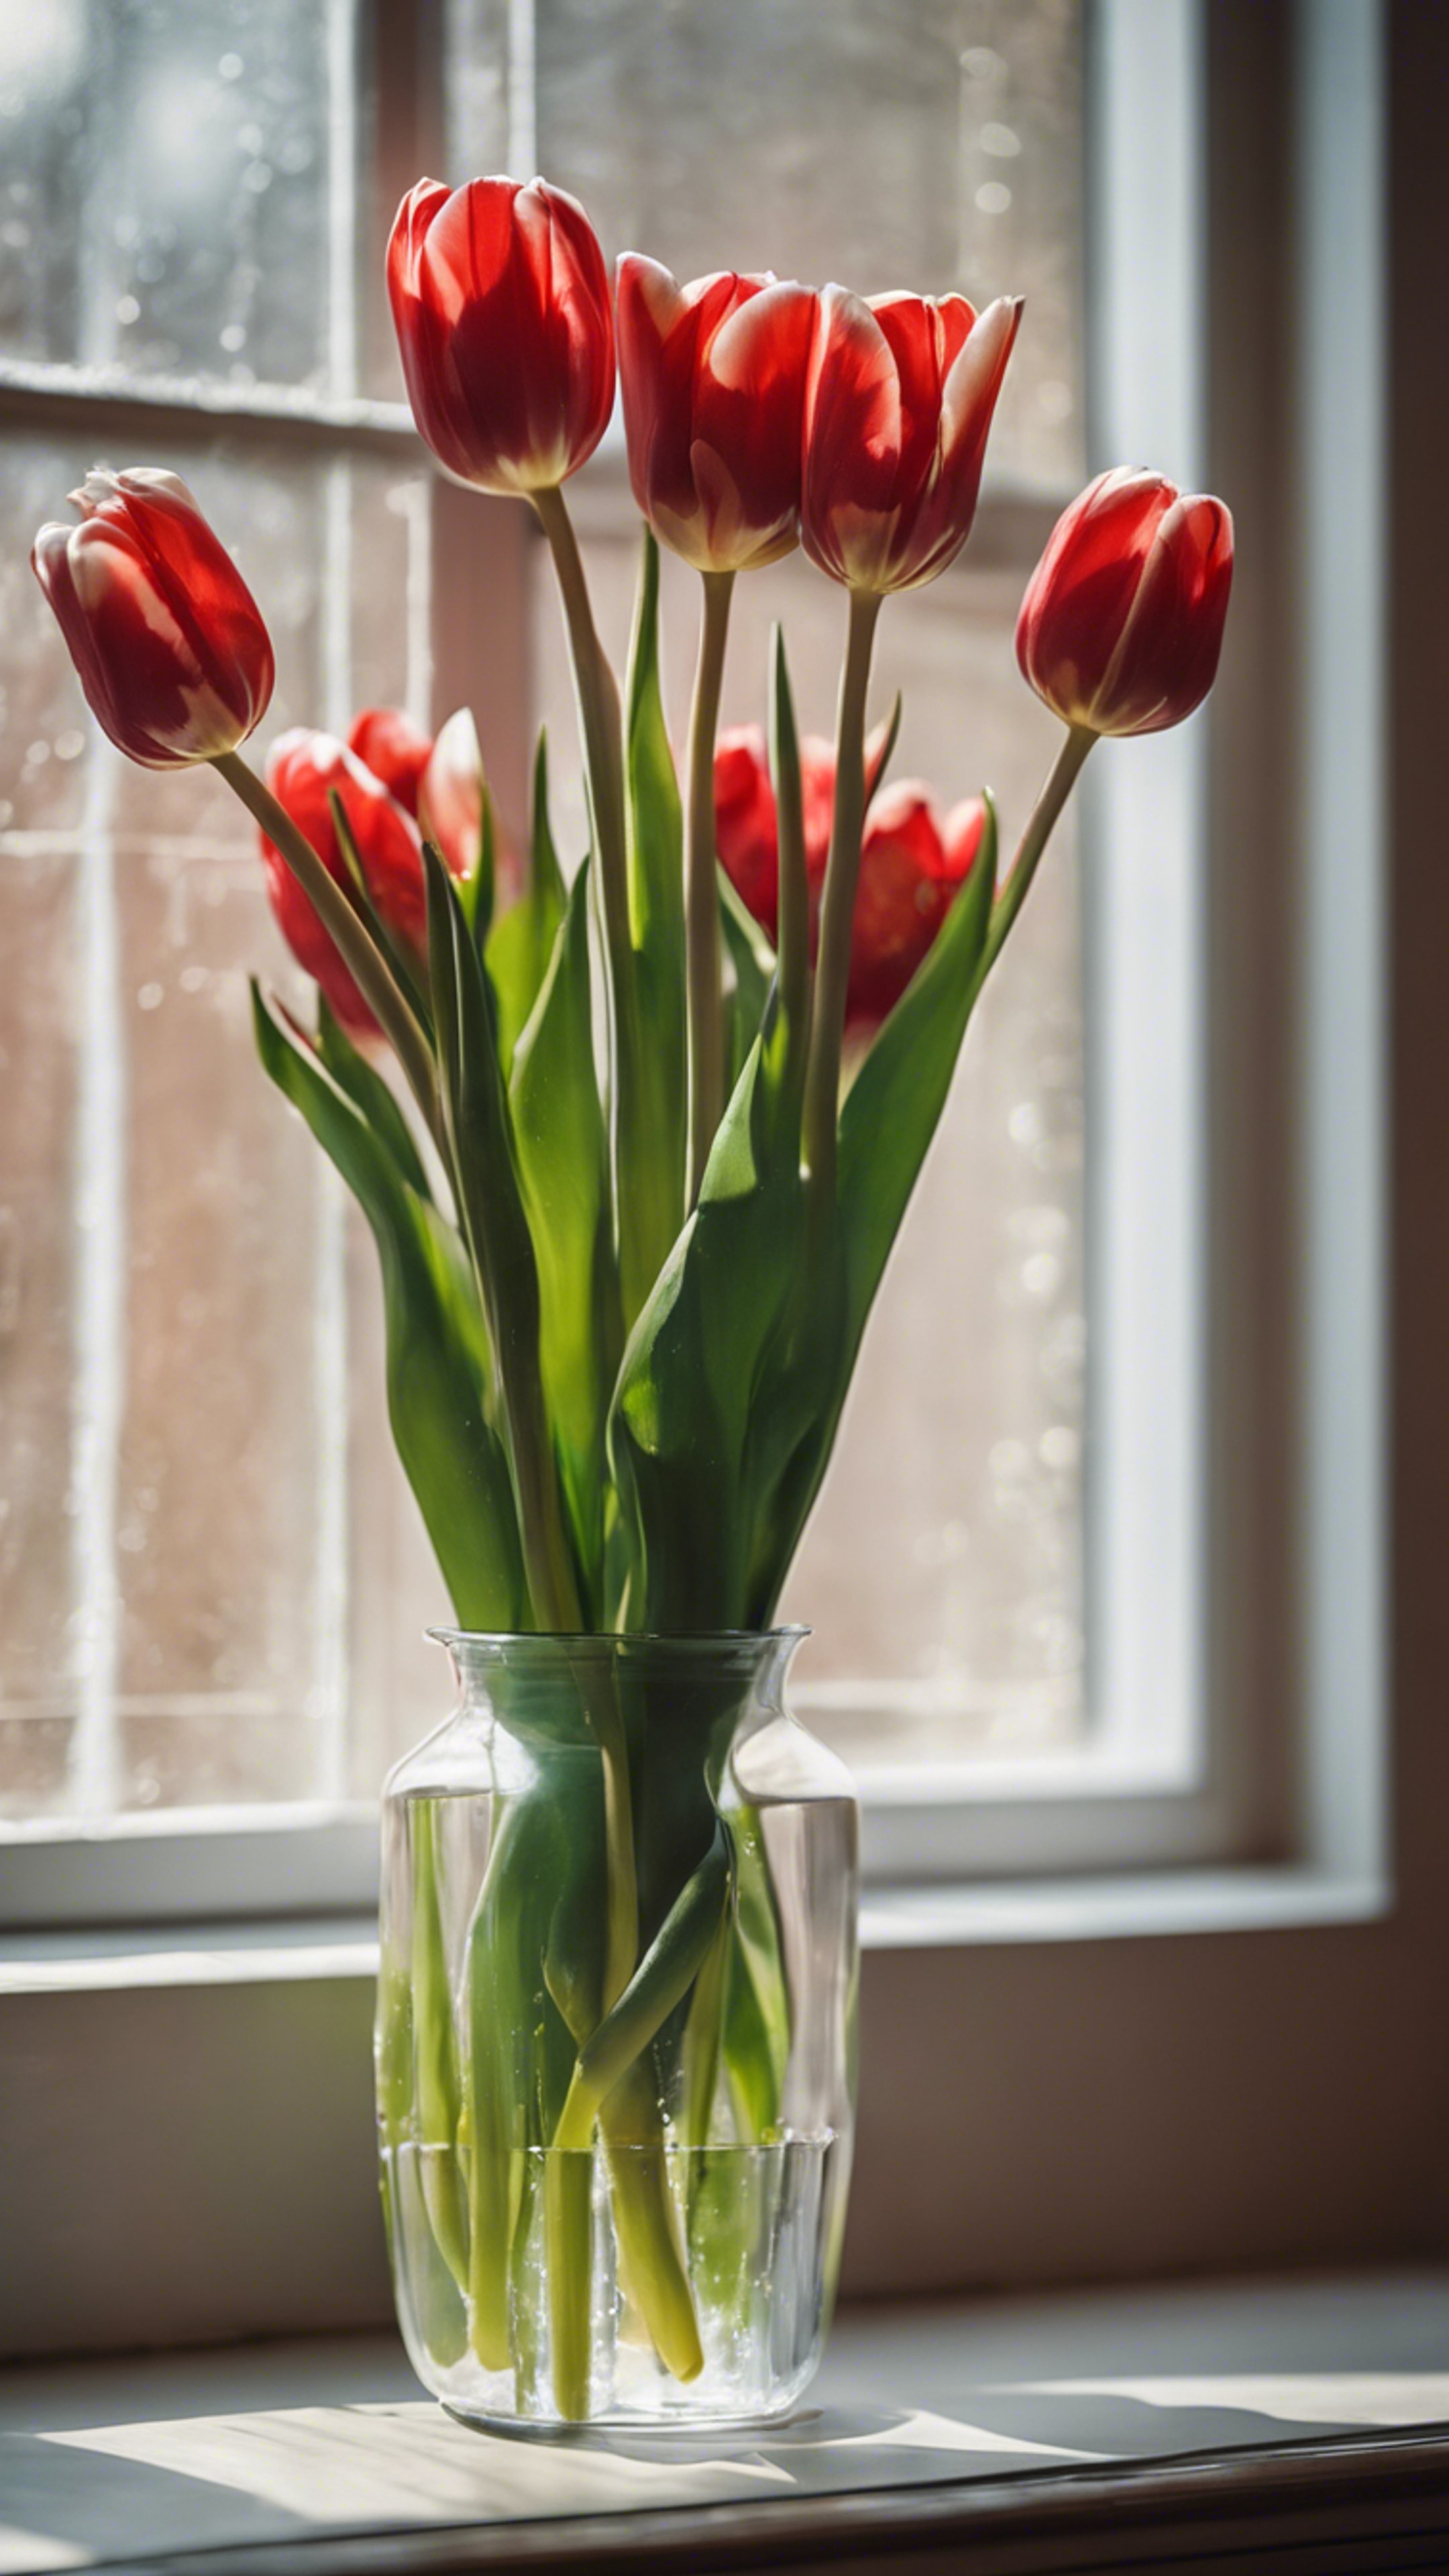 A bunch of vivid red and white tulips in a glass vase, lit by natural light. Behang[fc69acd6917c413b913f]